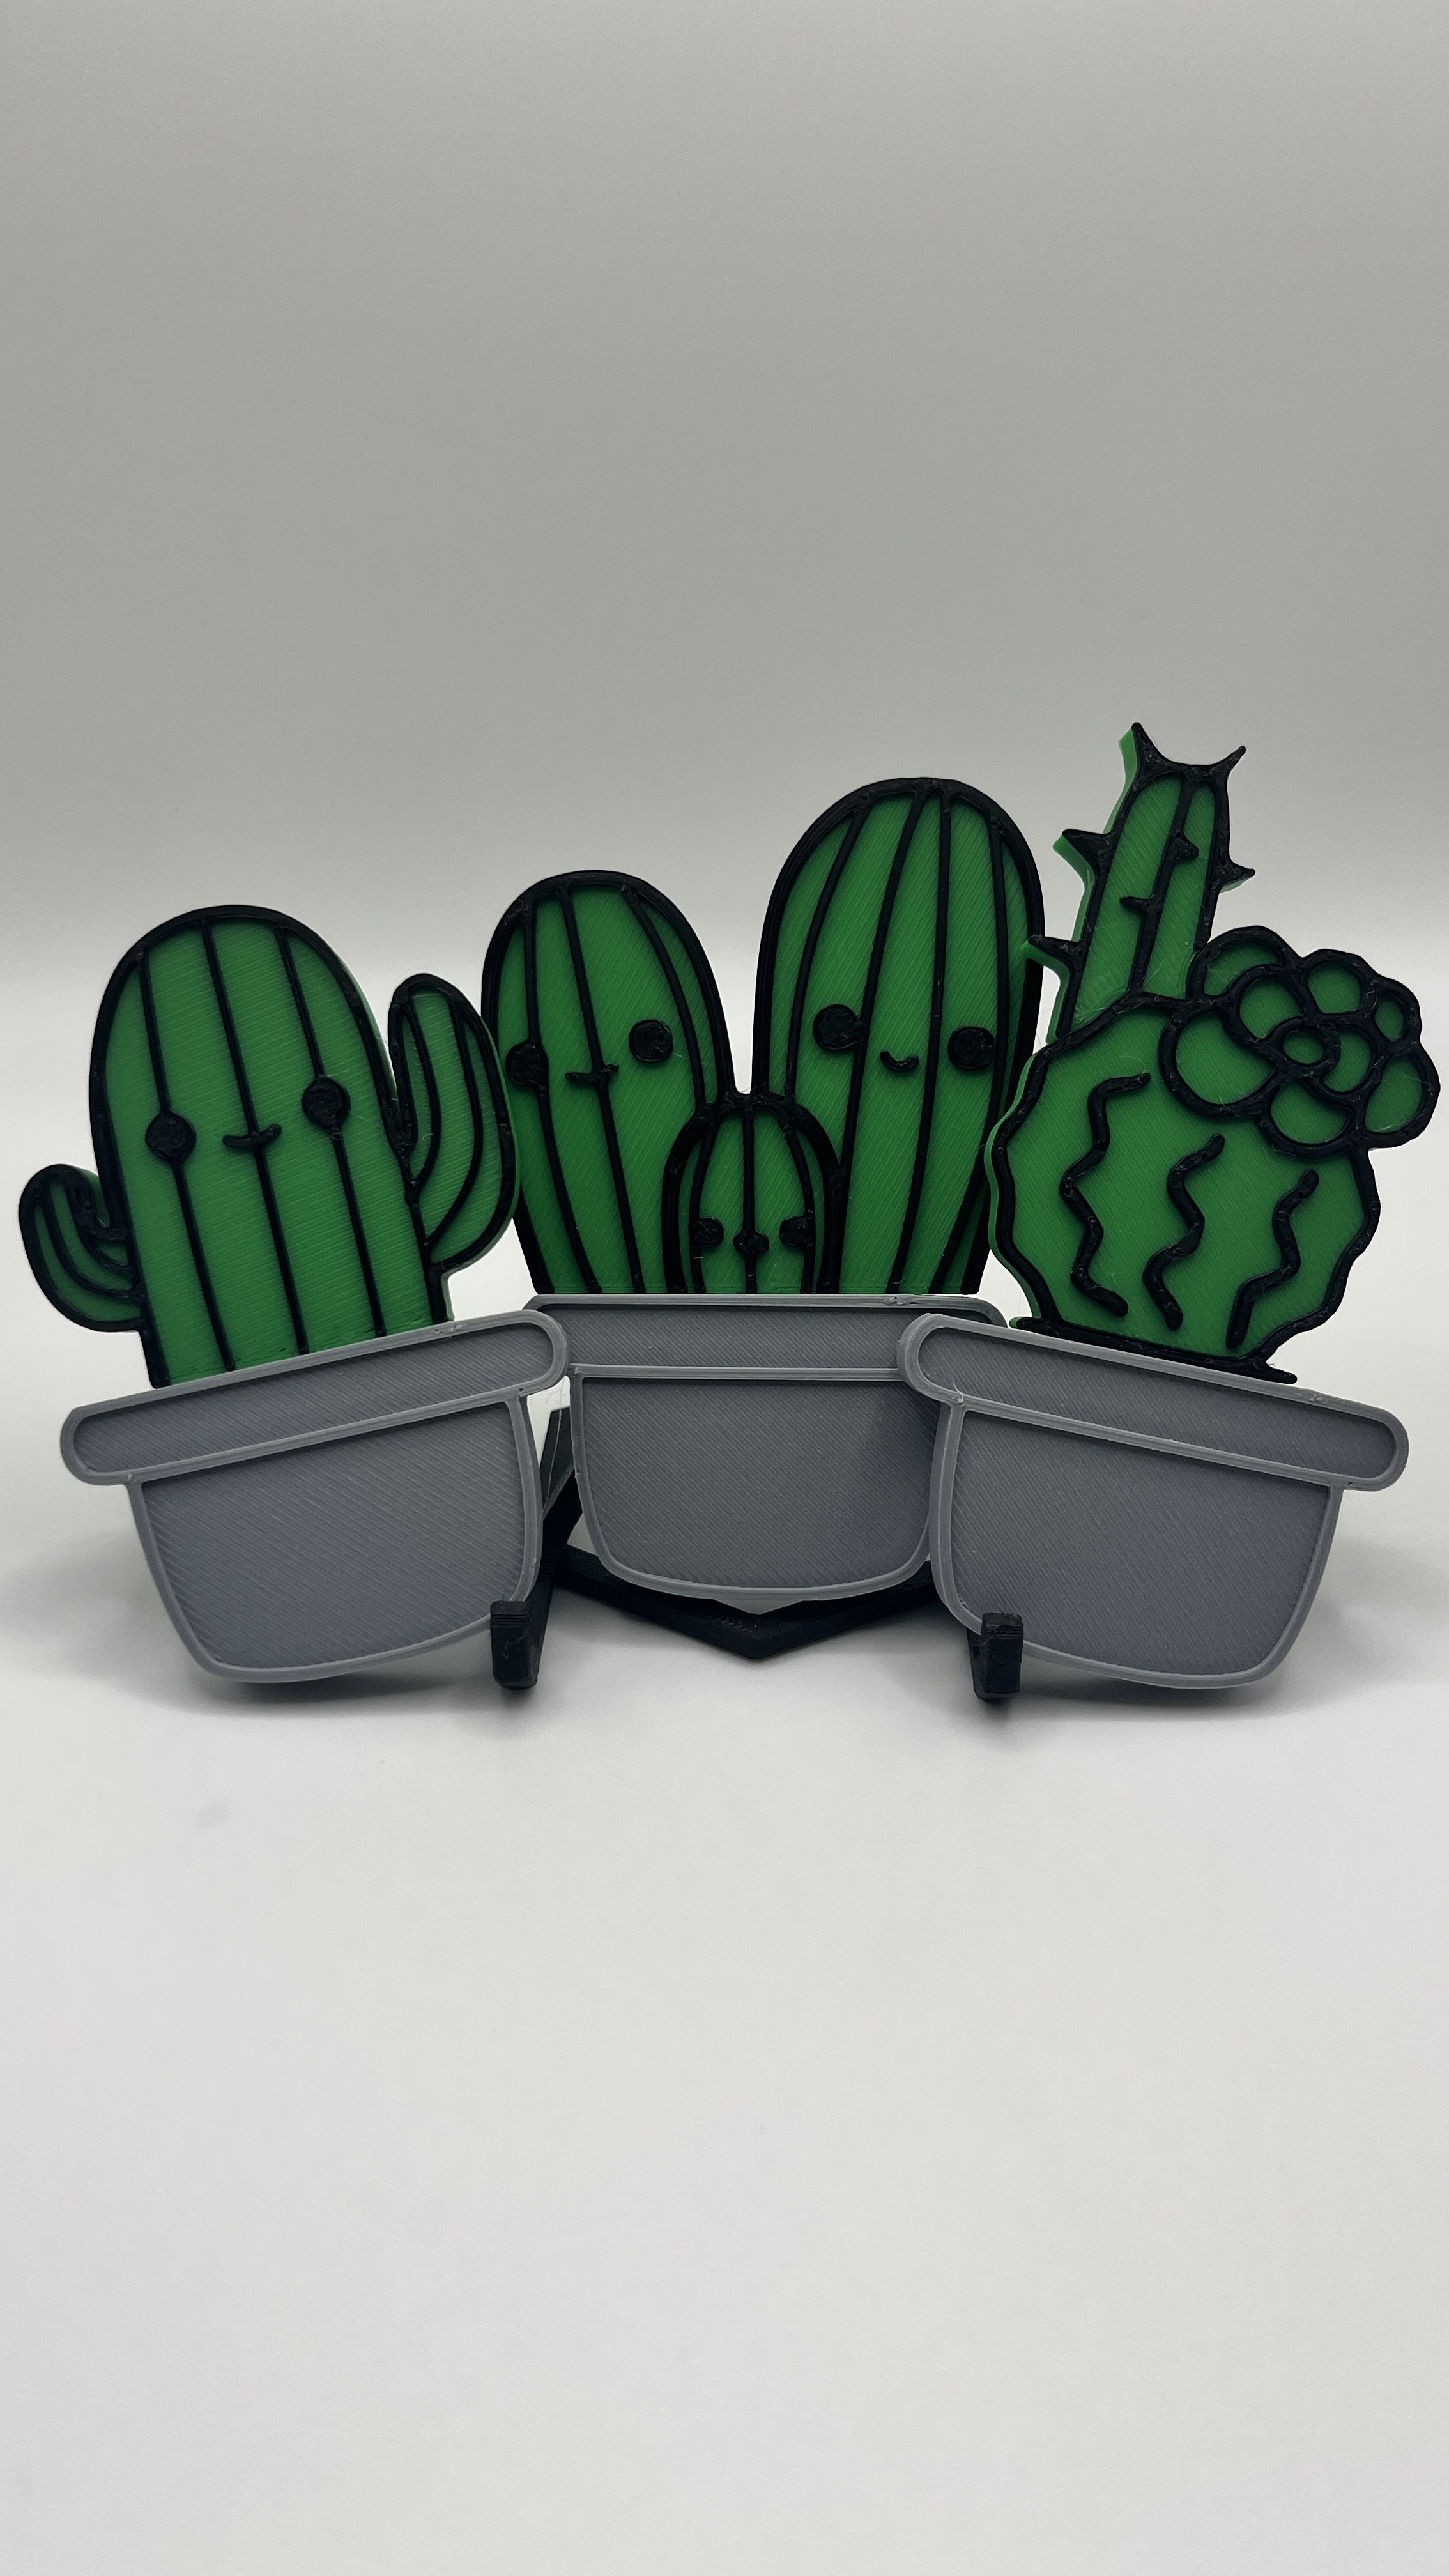 Customizable Potted Plants Magnets